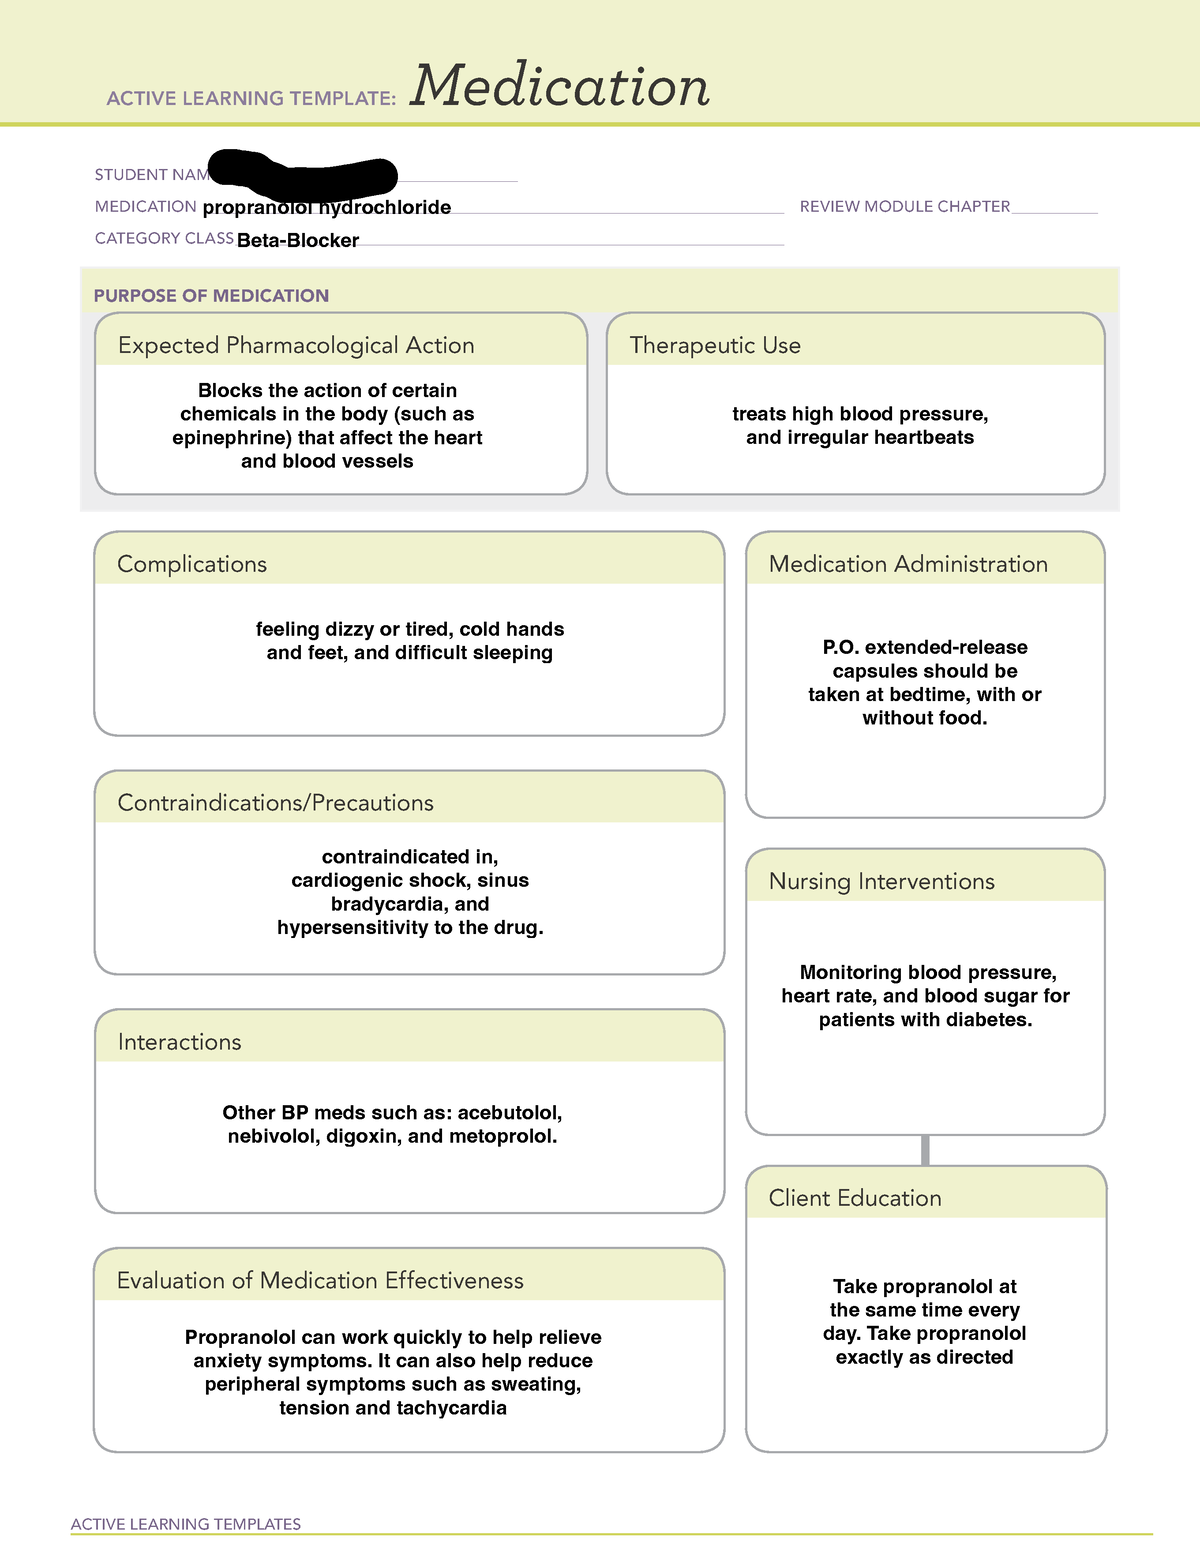 Propranolol hydrochloride Pharm Med Card ACTIVE LEARNING TEMPLATES